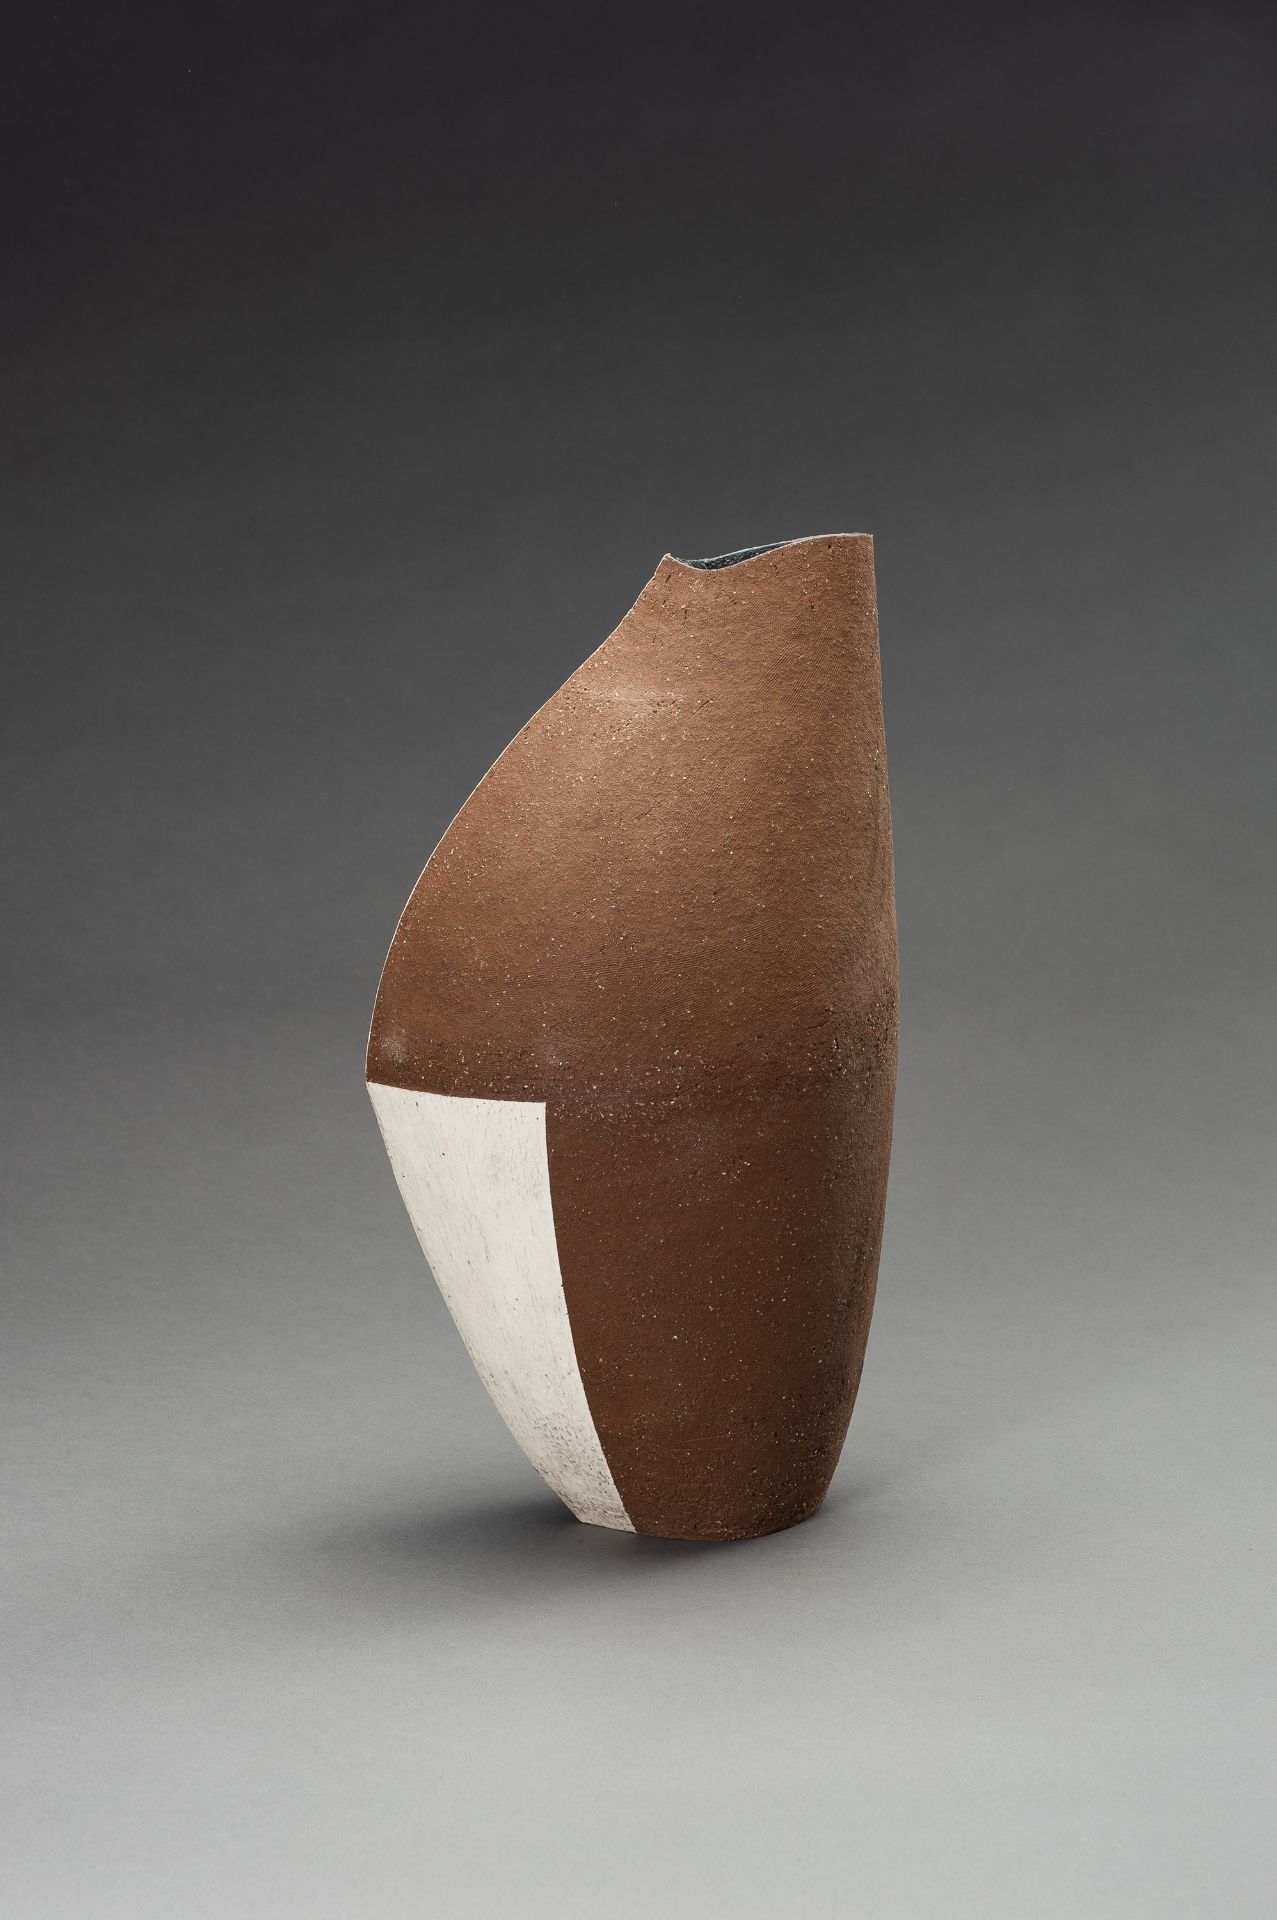 MASA TOSHI: A CONTEMPORARY LACQUERED CERAMIC VASE - Image 3 of 11